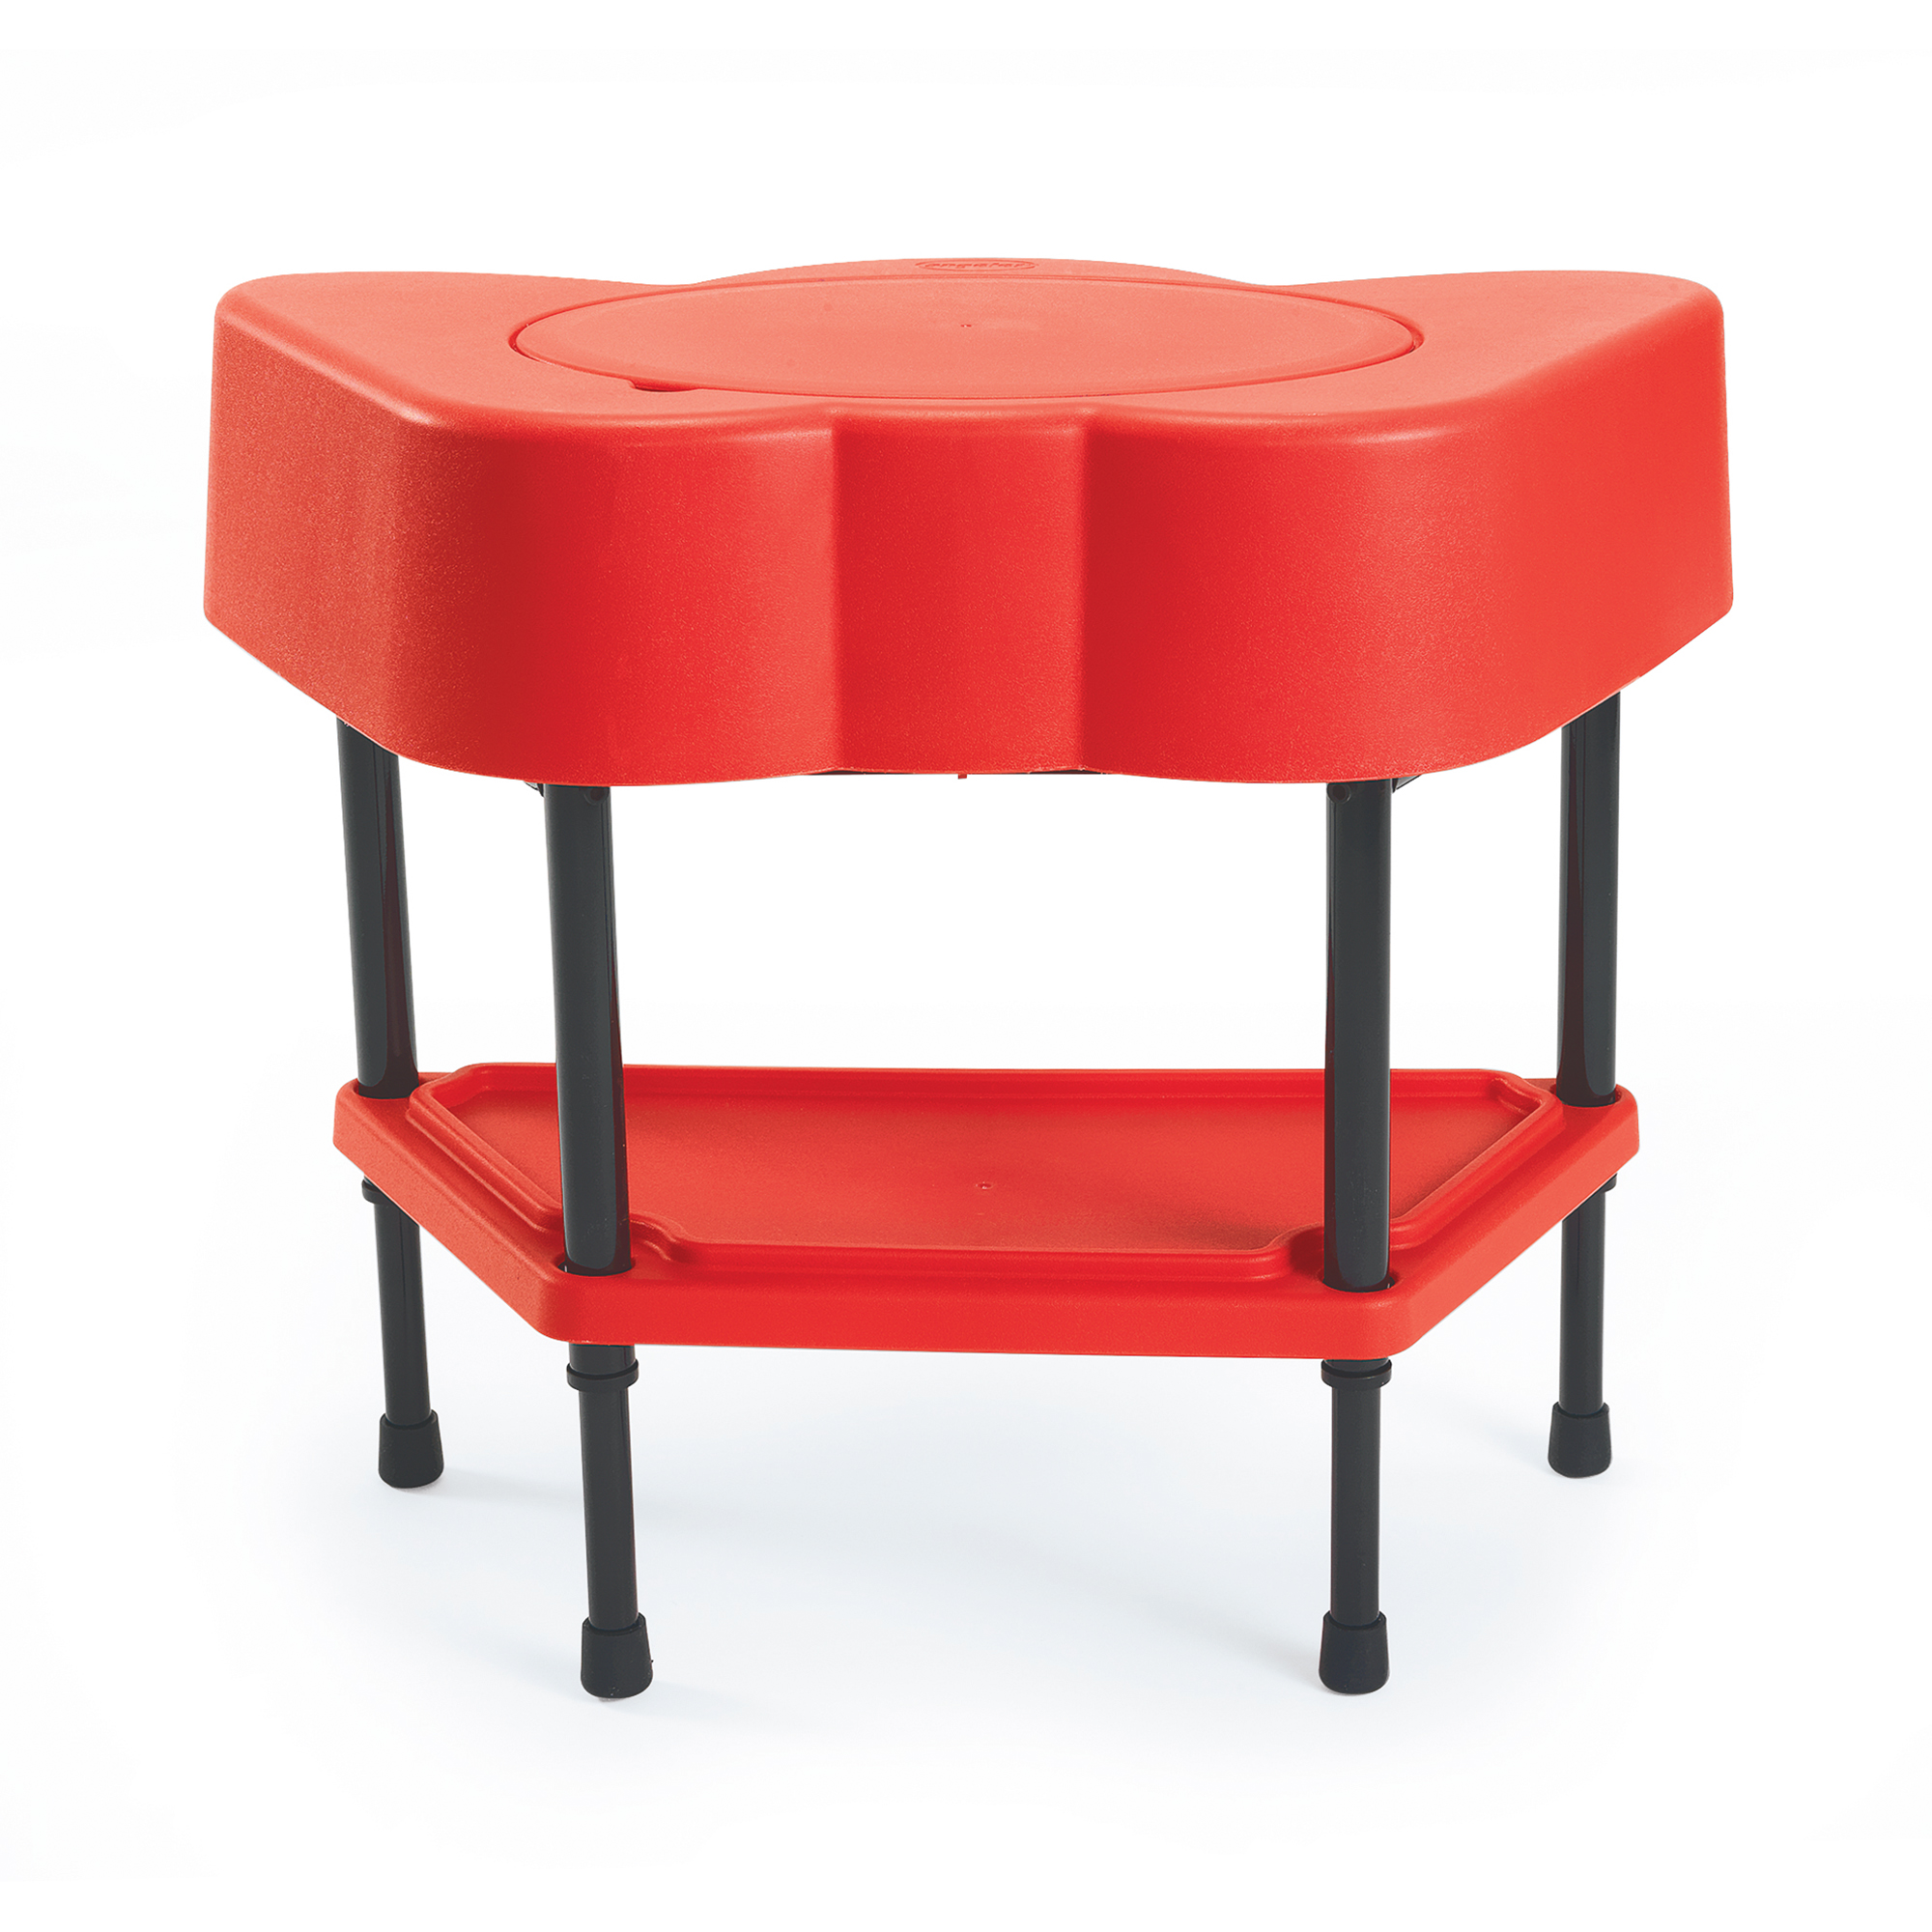 Sensory Table - Red